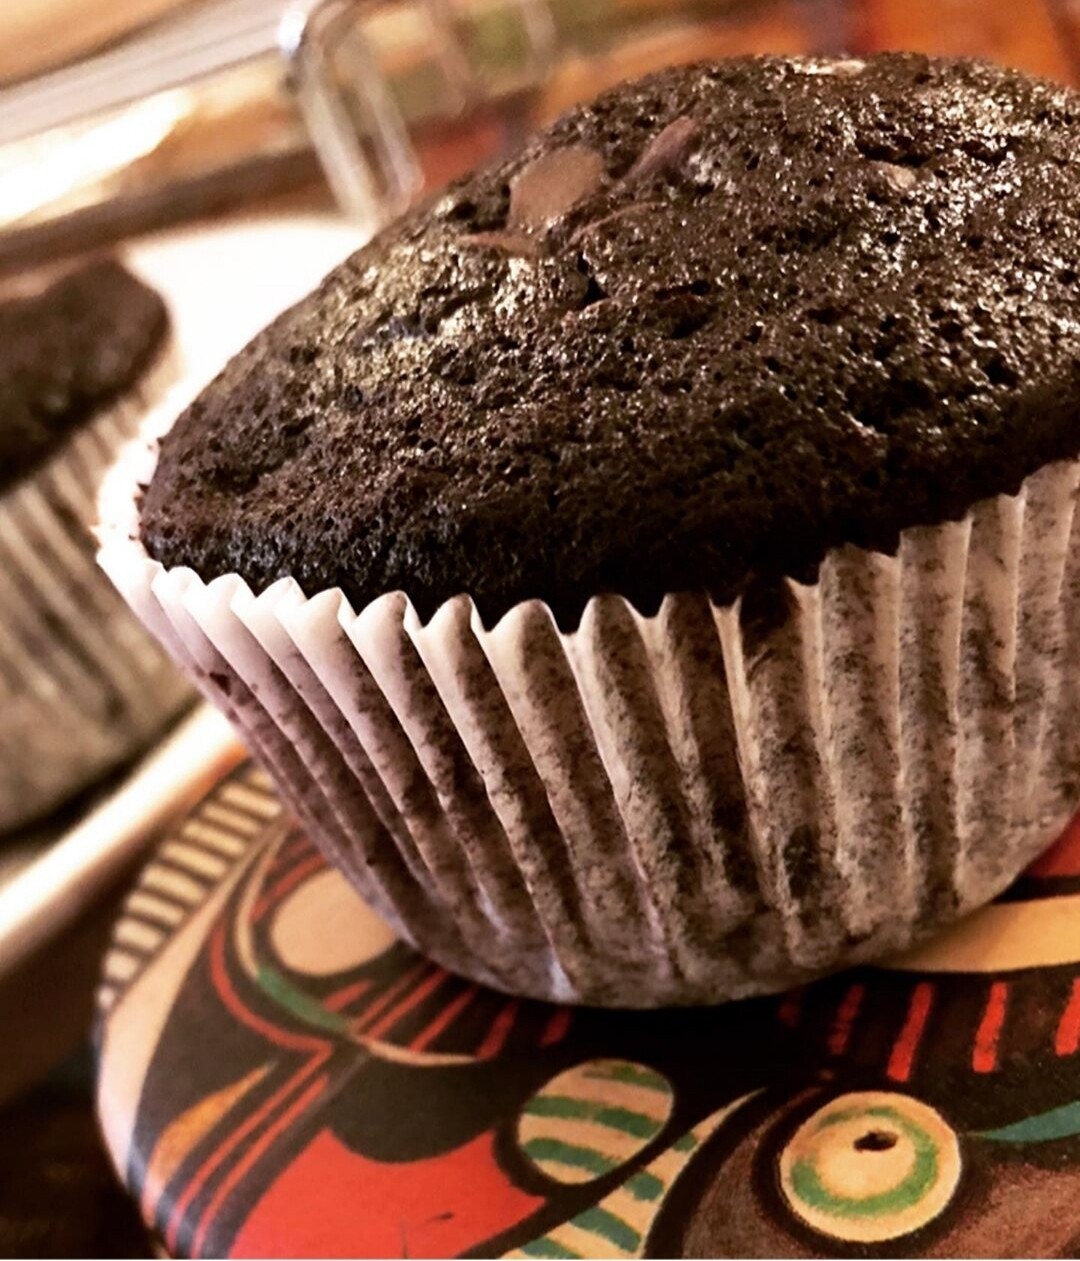 Double Choco Muffin (3 muffins)